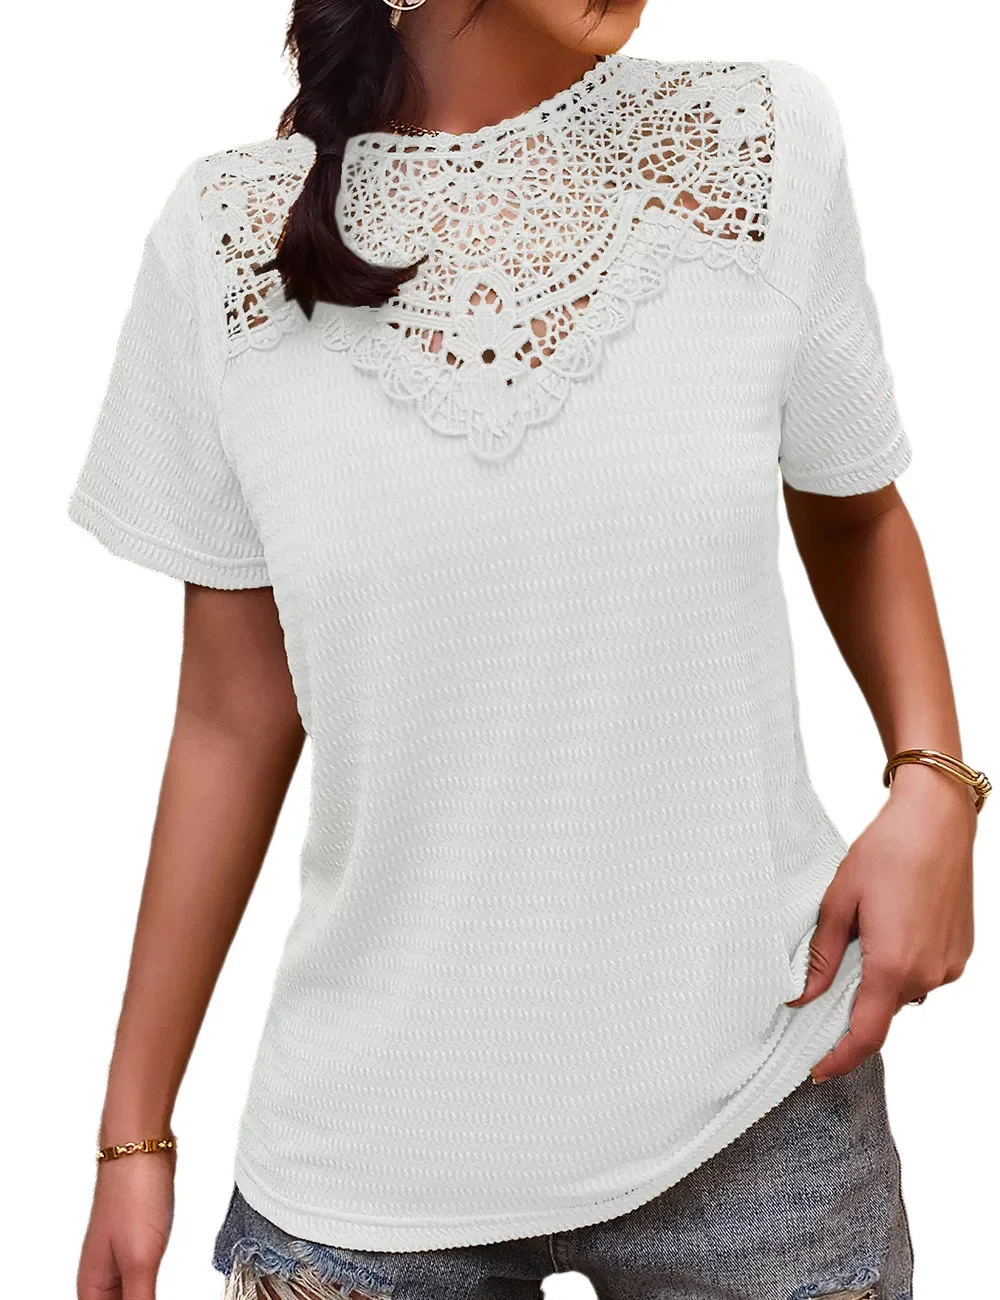 White Splicing Lace Knit Jaquard Short Sleeve Tops